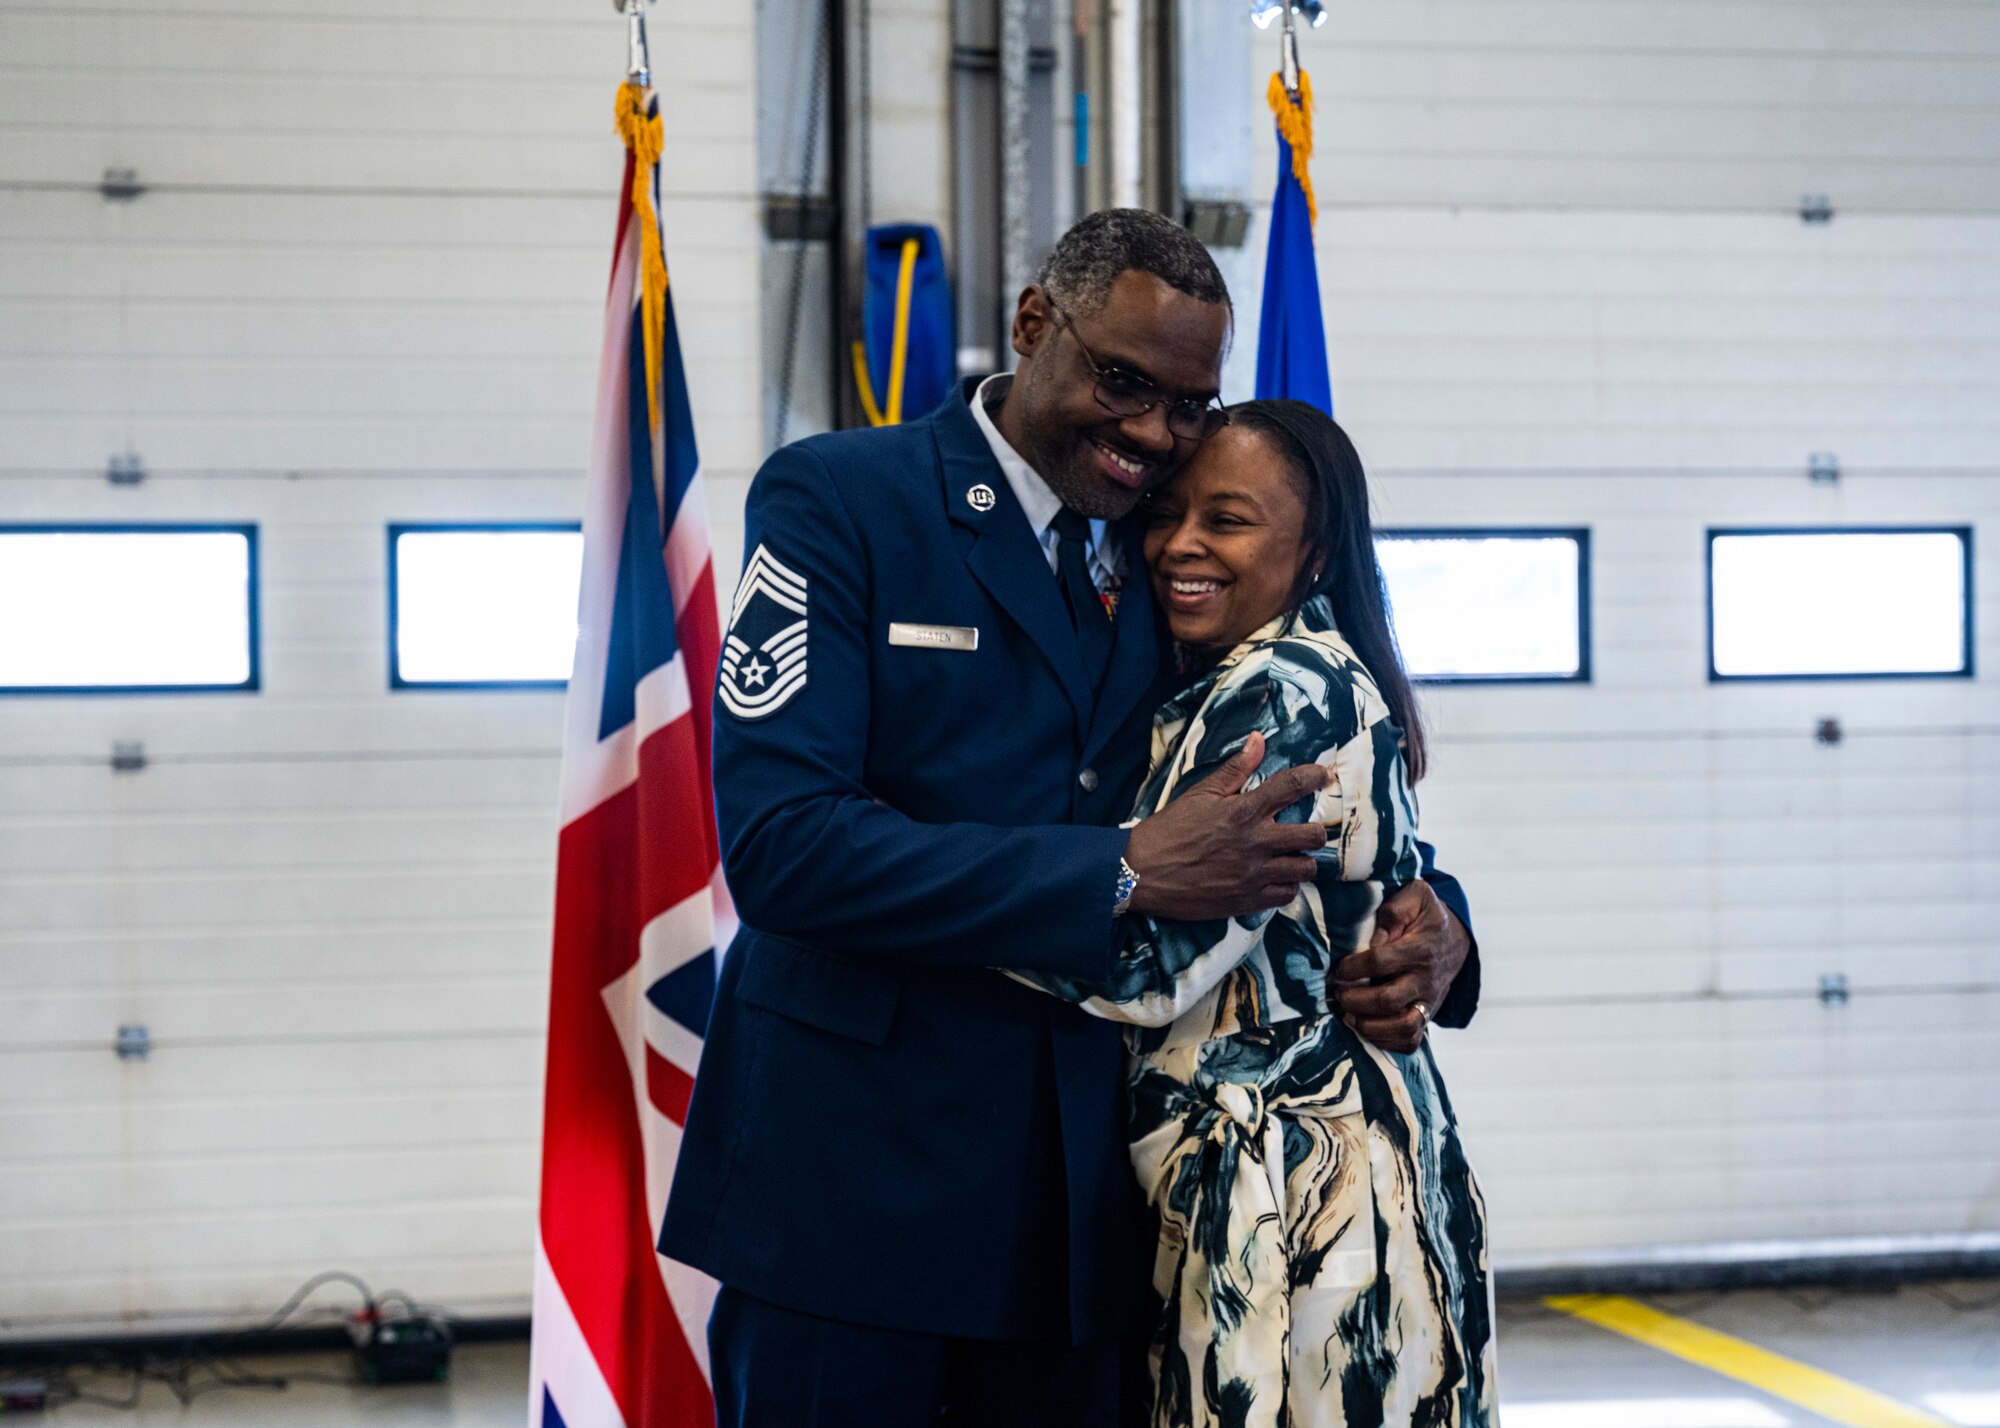 A retirement ceremony was held for Chief Master Sgt. Claborne Staten for his 30 years of dedicated service to the U.S. Air Force.